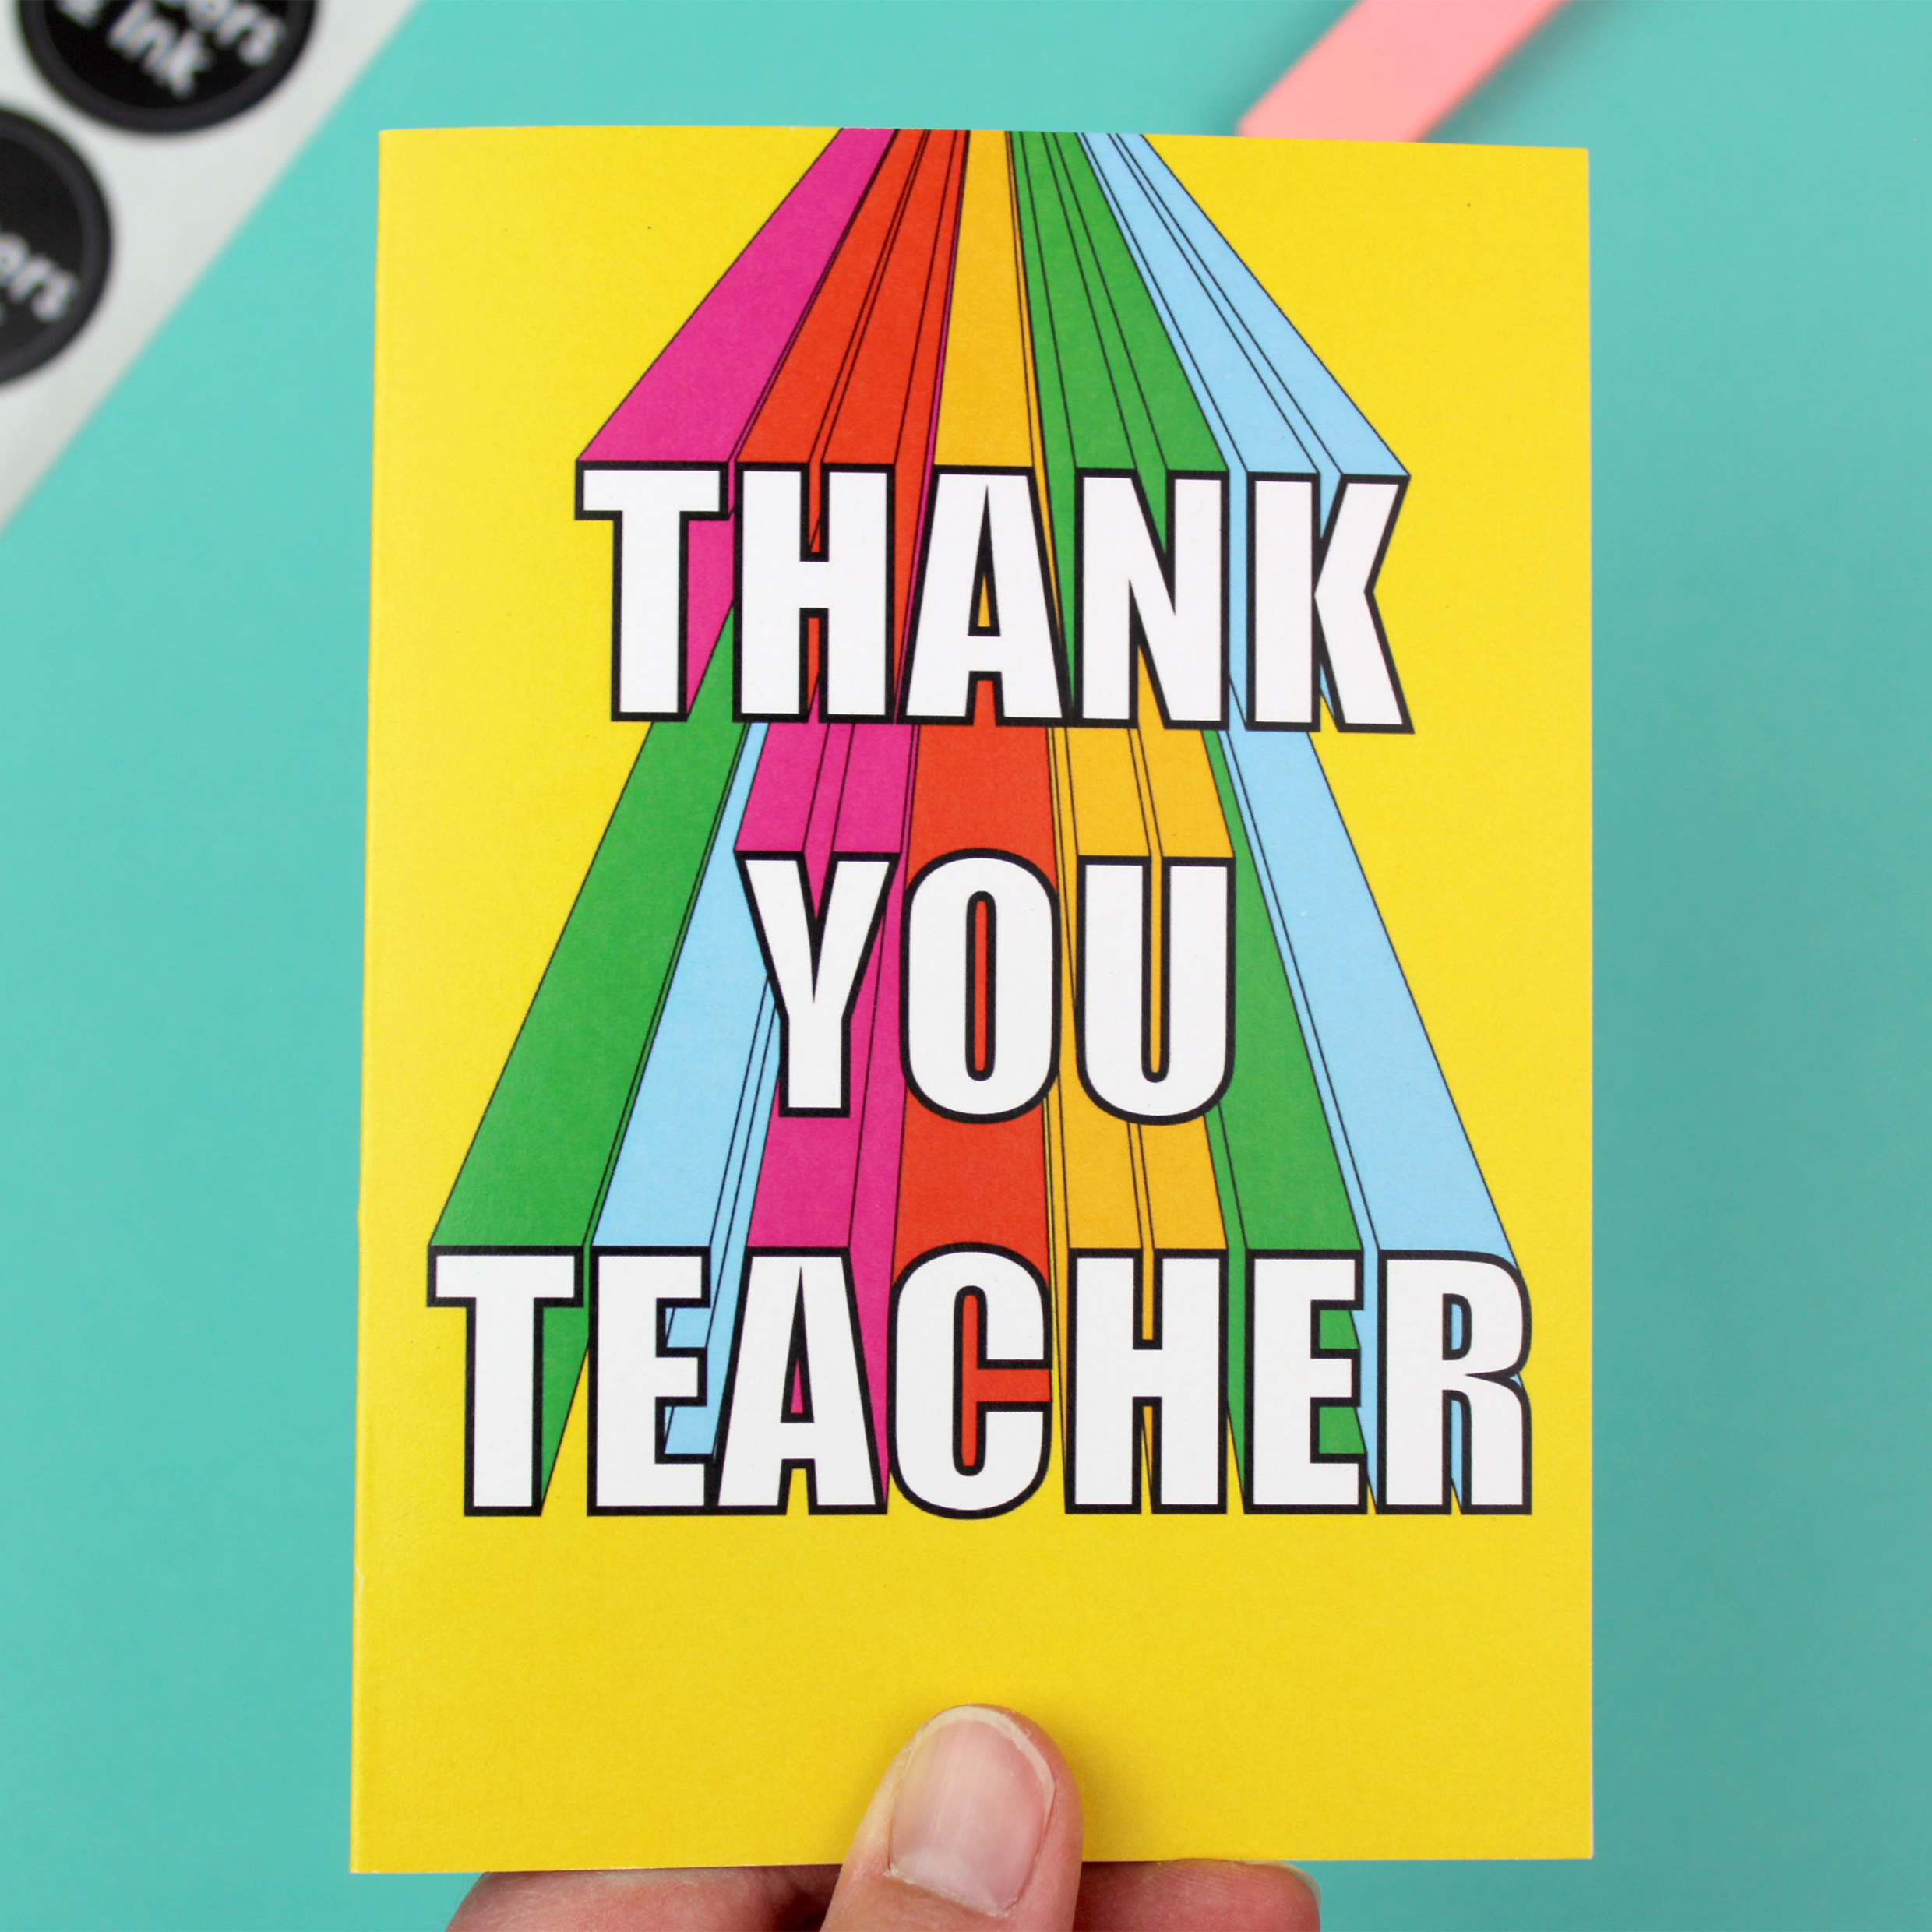 The image shows a bright and colourful Greetings Card and a yellow envelope. The card has a yellow background and rainbow coloured 3D lettering that reads Thank You Teacher.